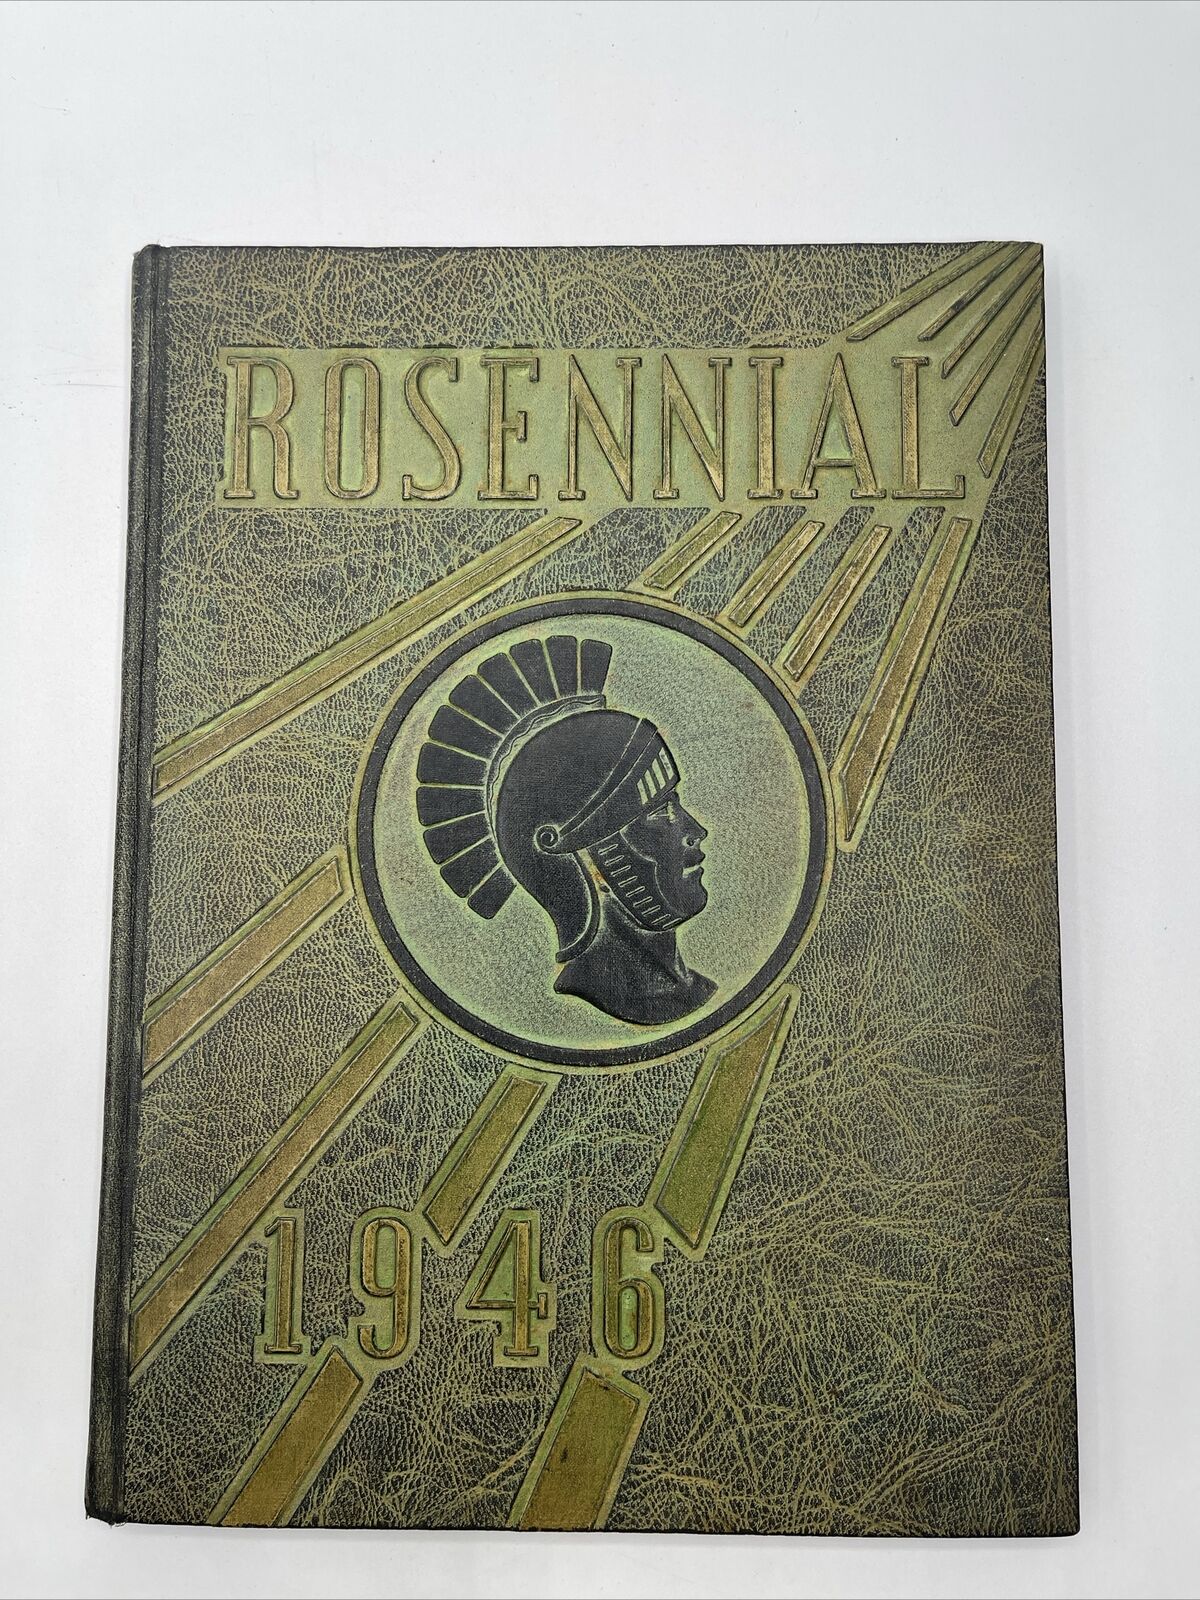 1946 New Castle High School The Rosennial Yearbook New Castle Indiana 